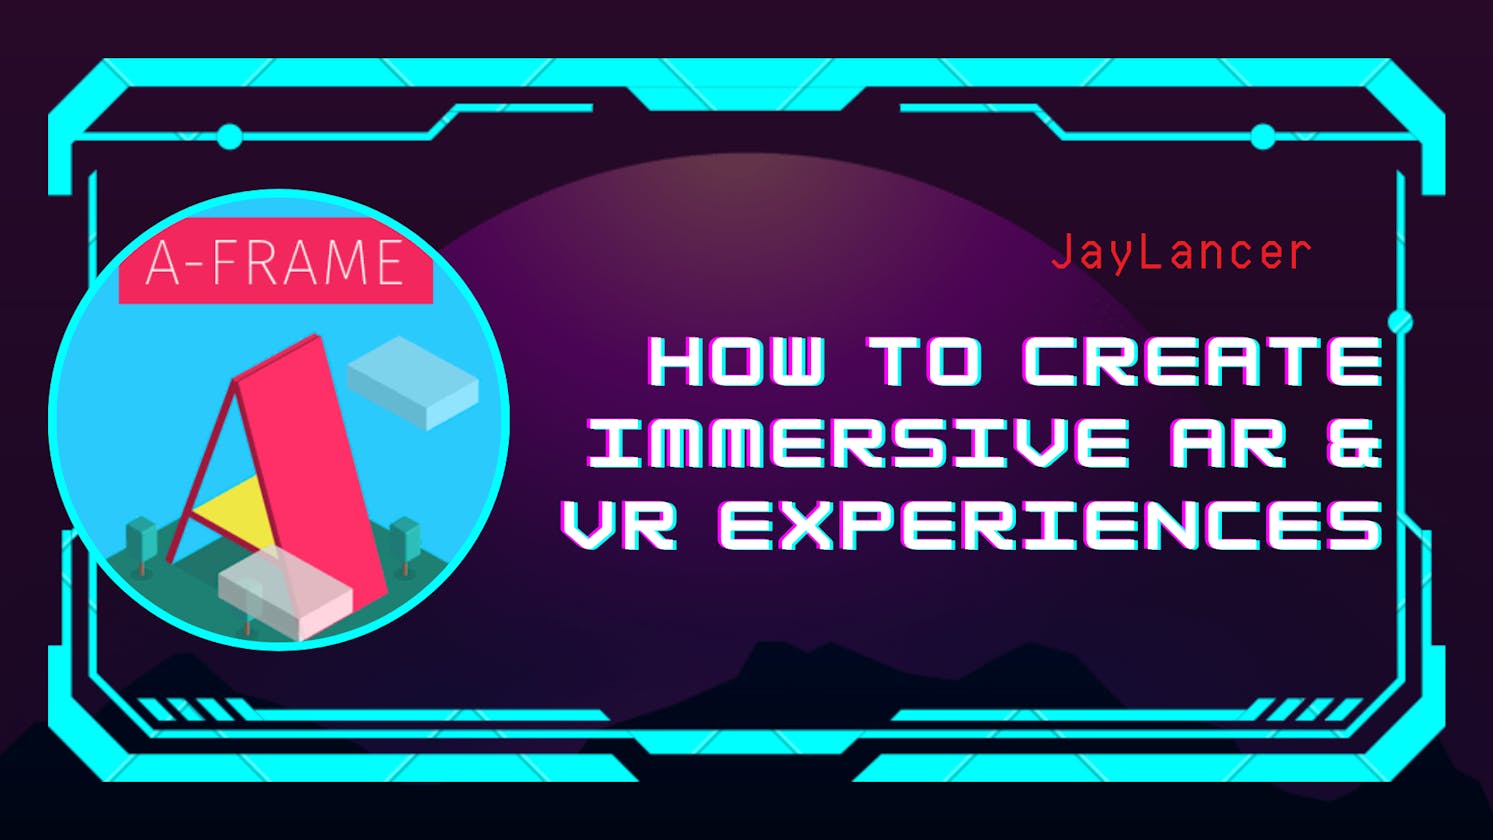 Discover How to Create Immersive AR & VR Experiences with A-frame!